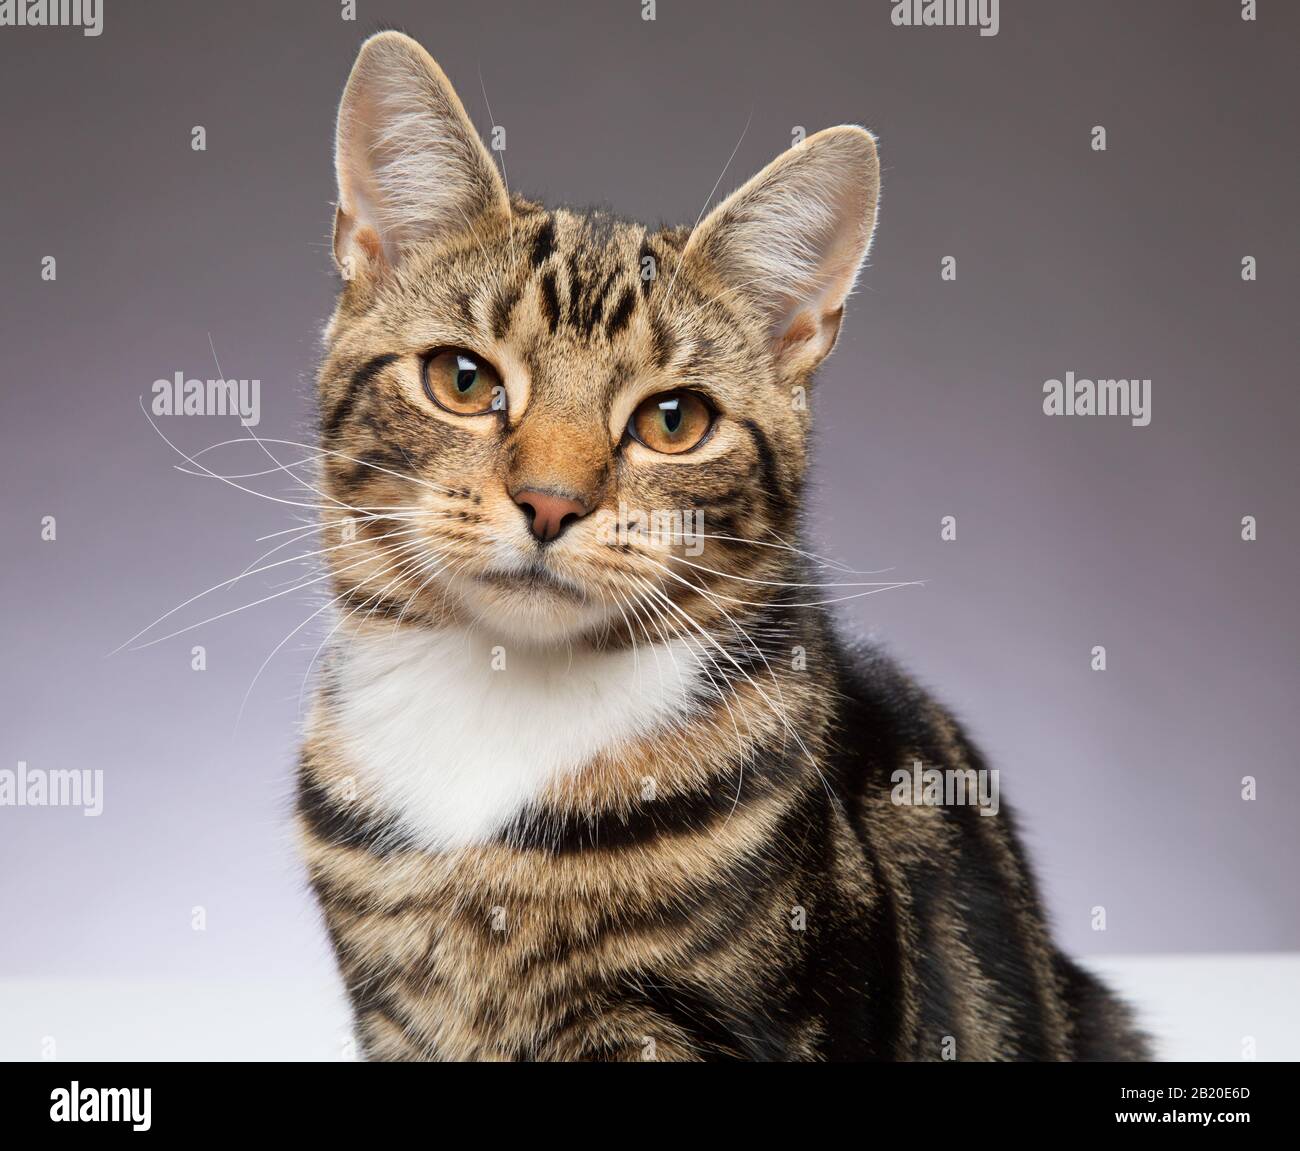 Young 9 month old Tabby cat looking to camera against a grey background Stock Photo